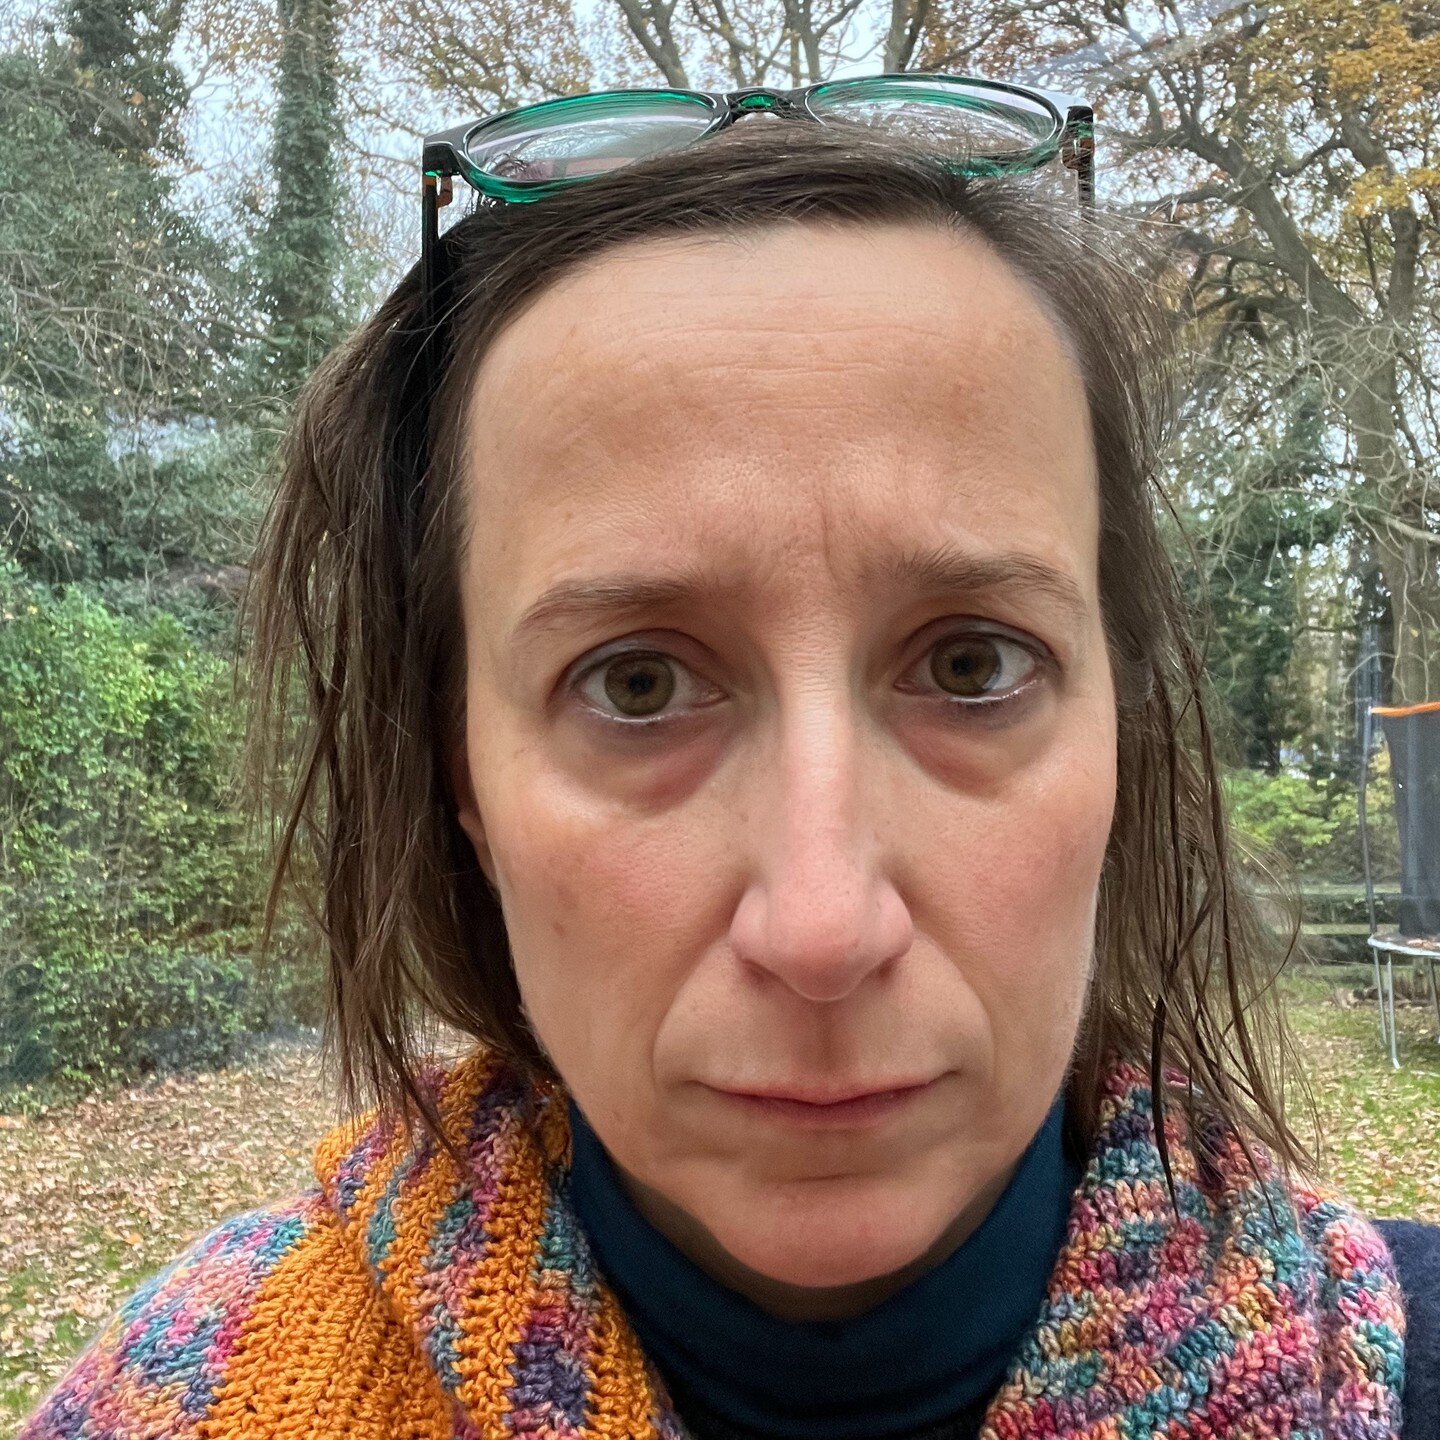 This is me, Monday morning, post hectic school run. After a week of broken sleep. Yesterday's eyeliner. Hair that never does what hair is supposed to. Oh and a default expression that is worry. I hadn't realised that until now. Sheesh!

I&rsquo;ve go